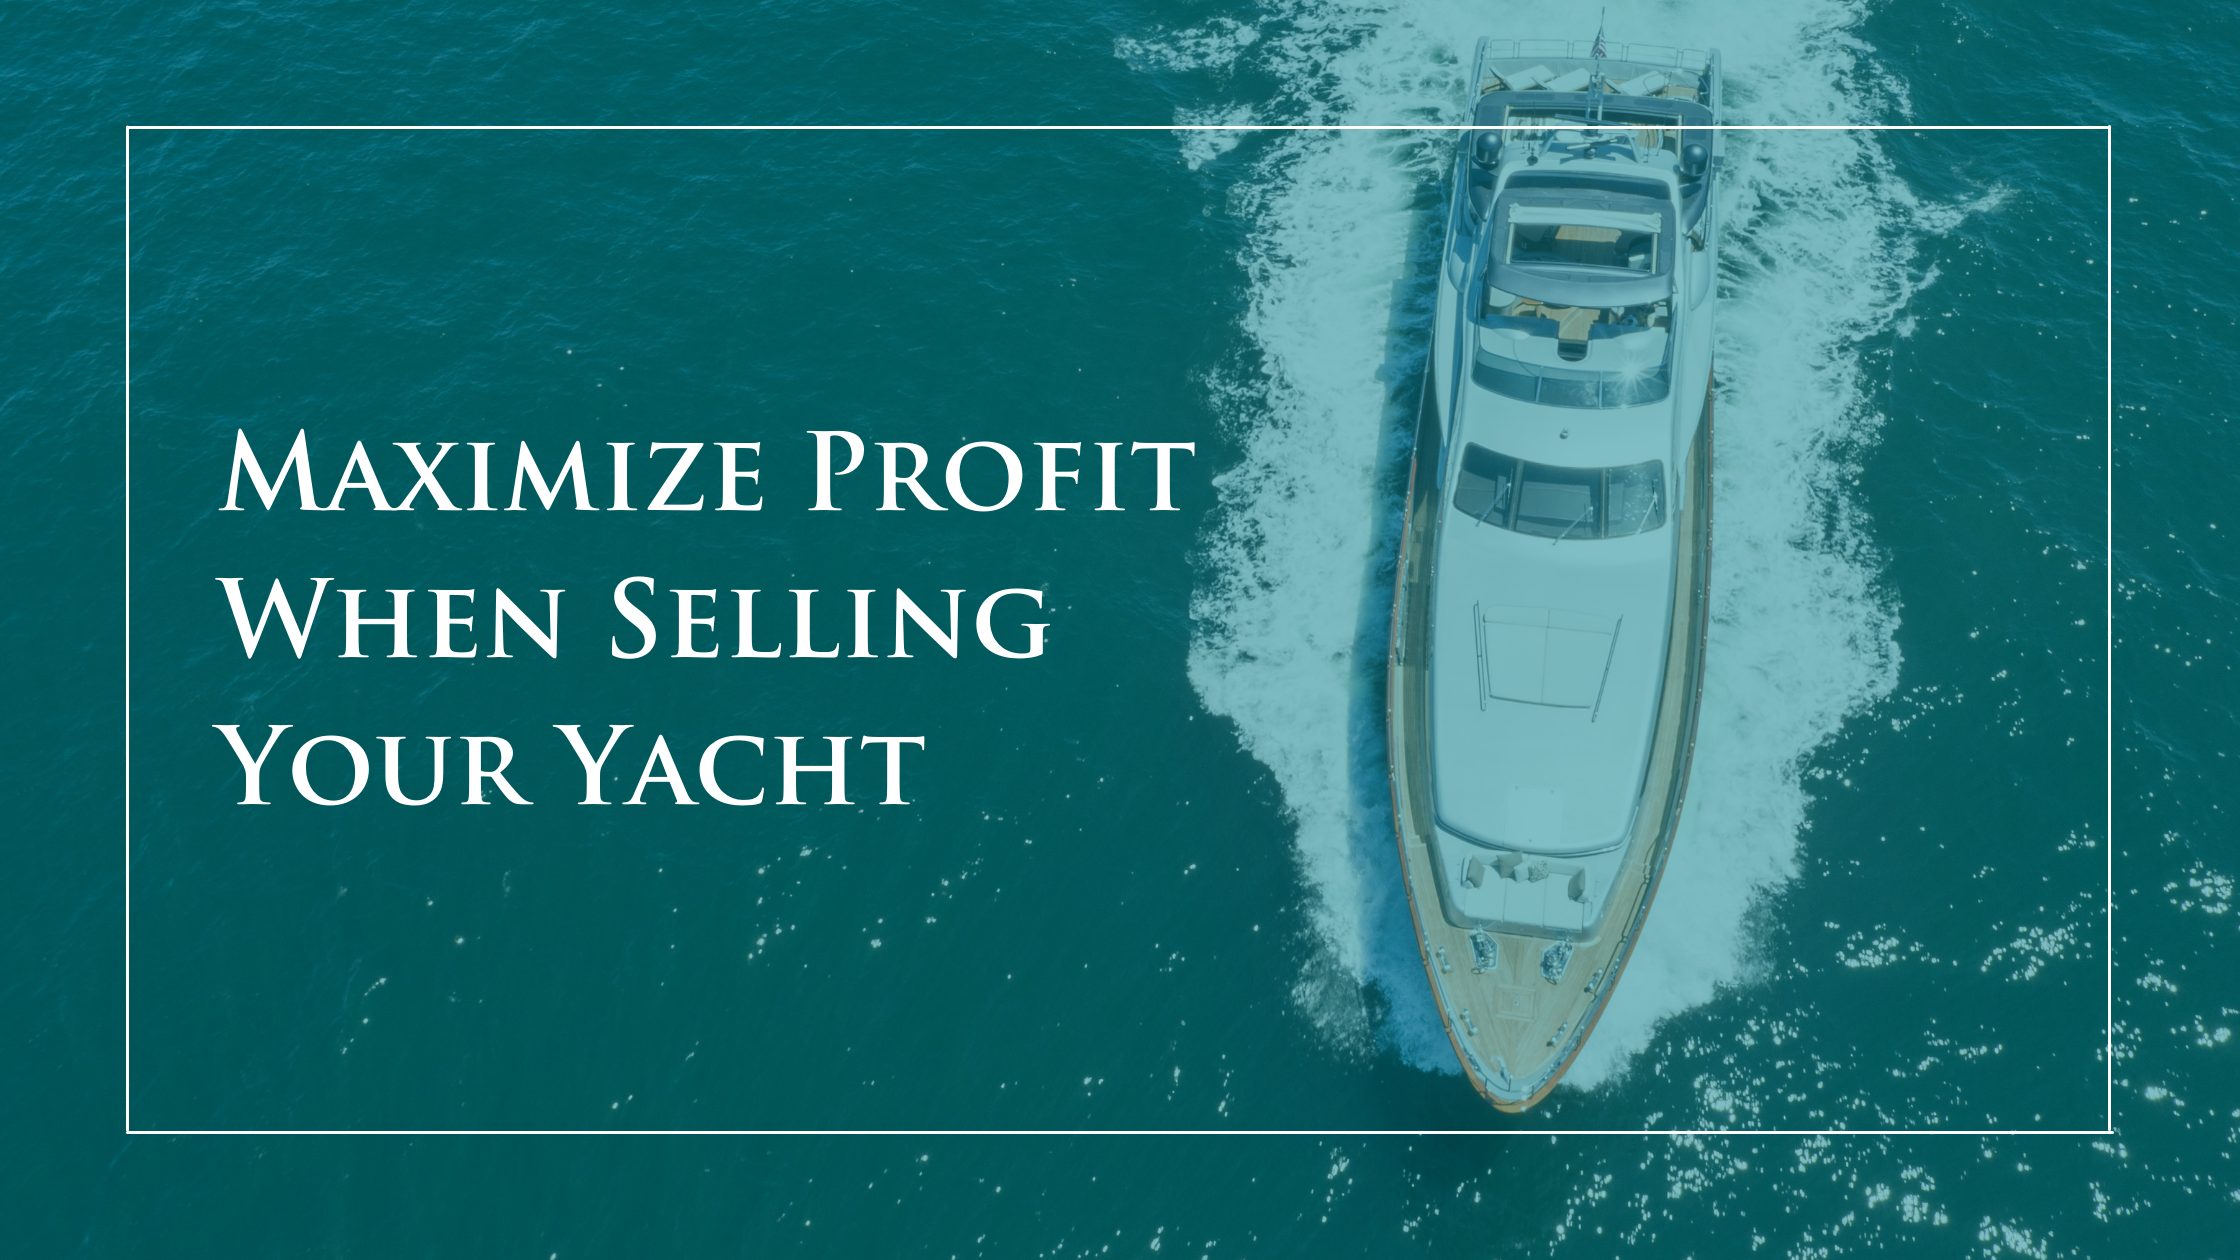 How to Maximize Profit When Selling Your Yacht